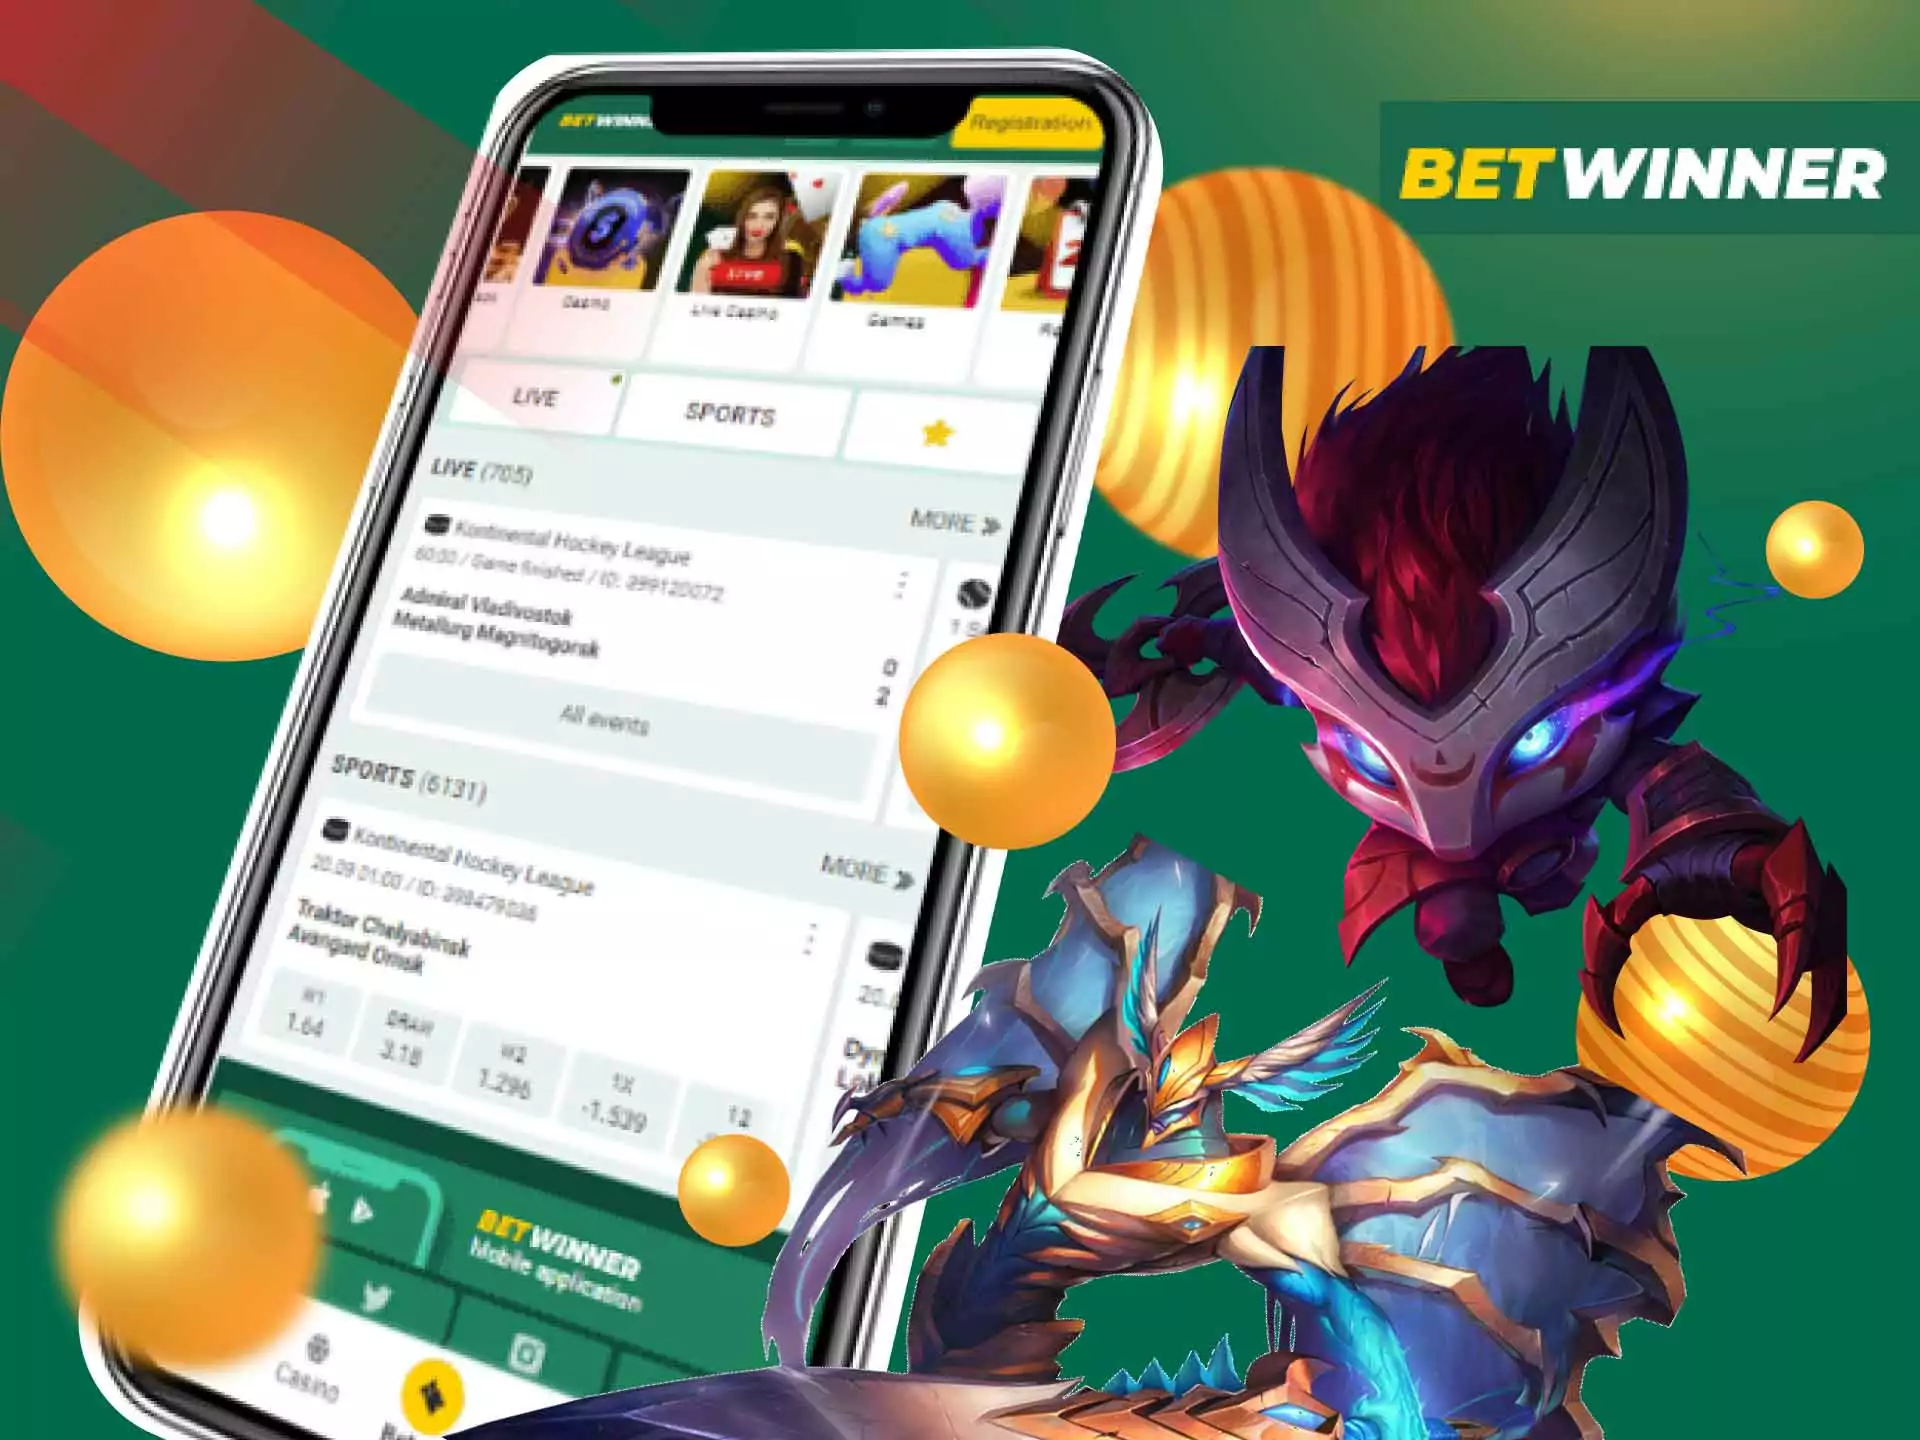 There are also many odds on the LOL betting at Betwinner.